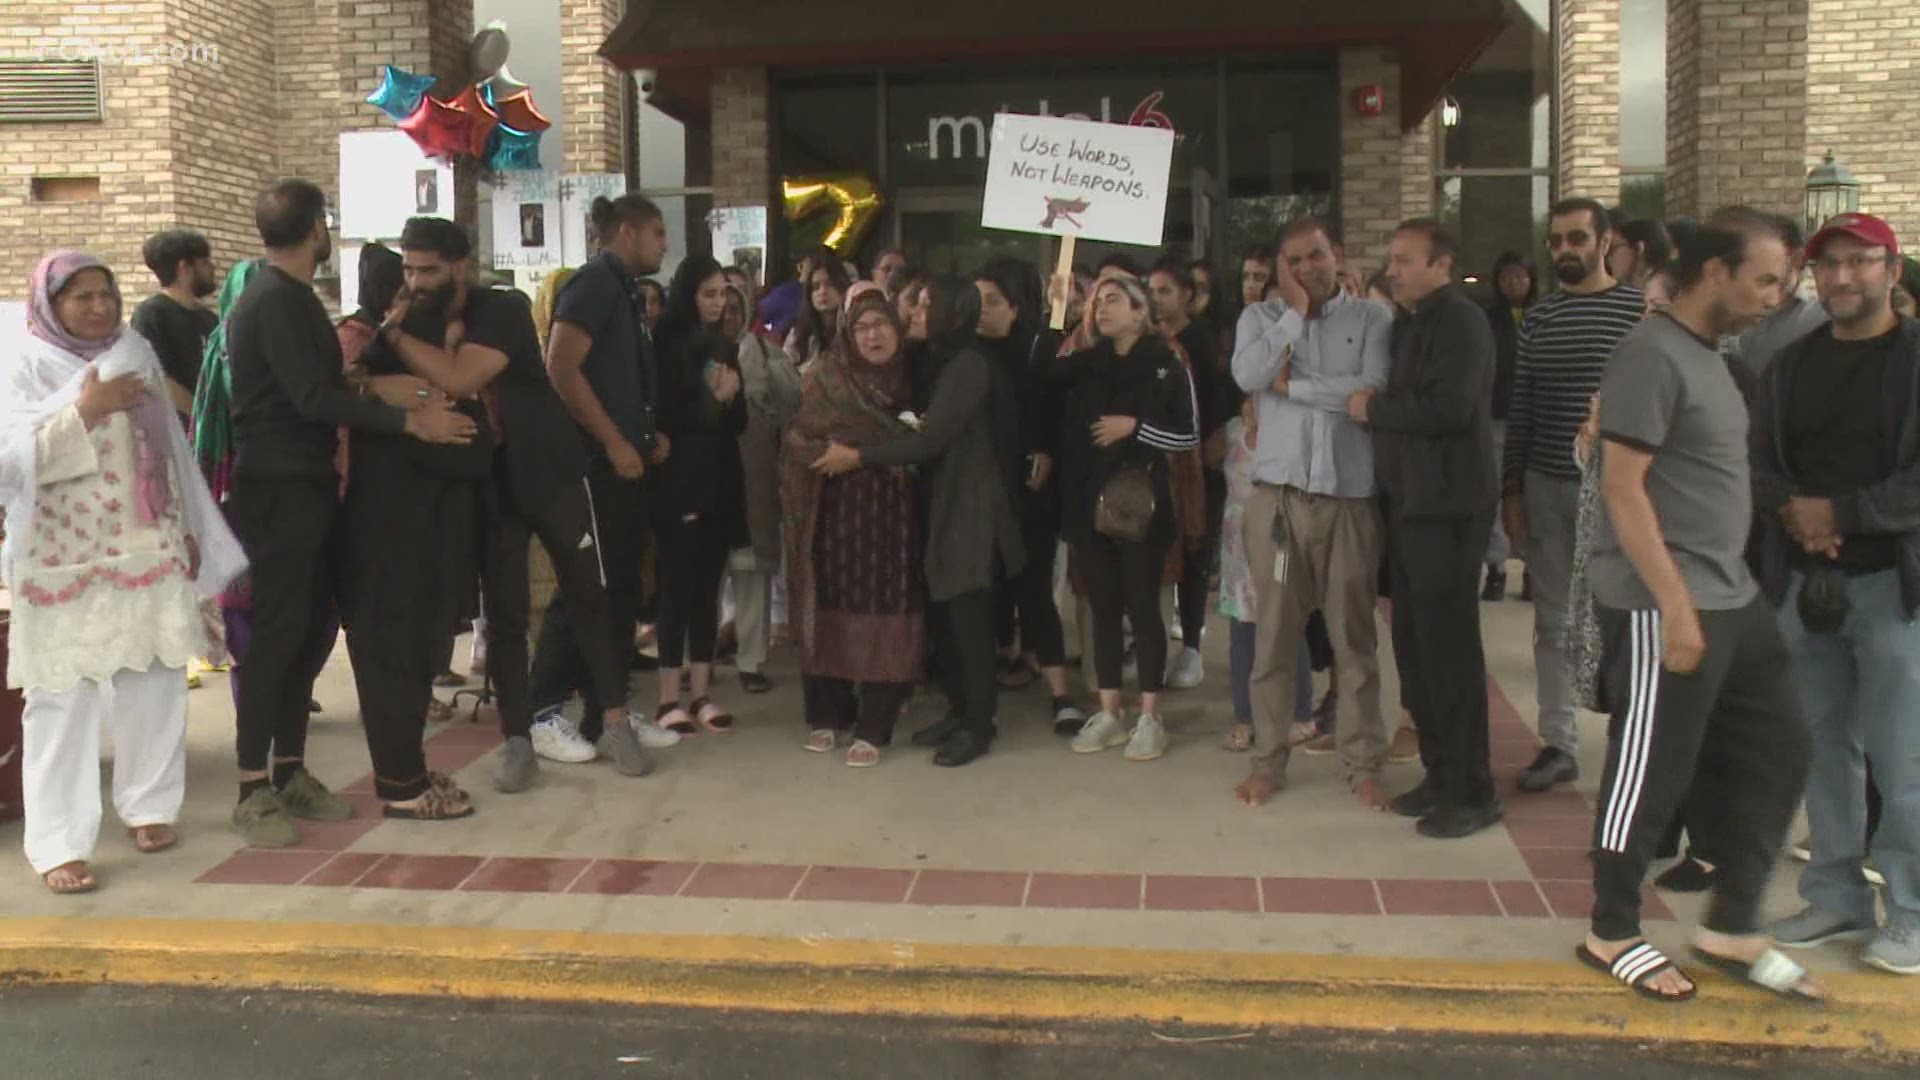 30-year-old Zeshan Chaudhry's family rallied outside of the Motel 6 after he was shot over a $10 pool pass last Sunday.